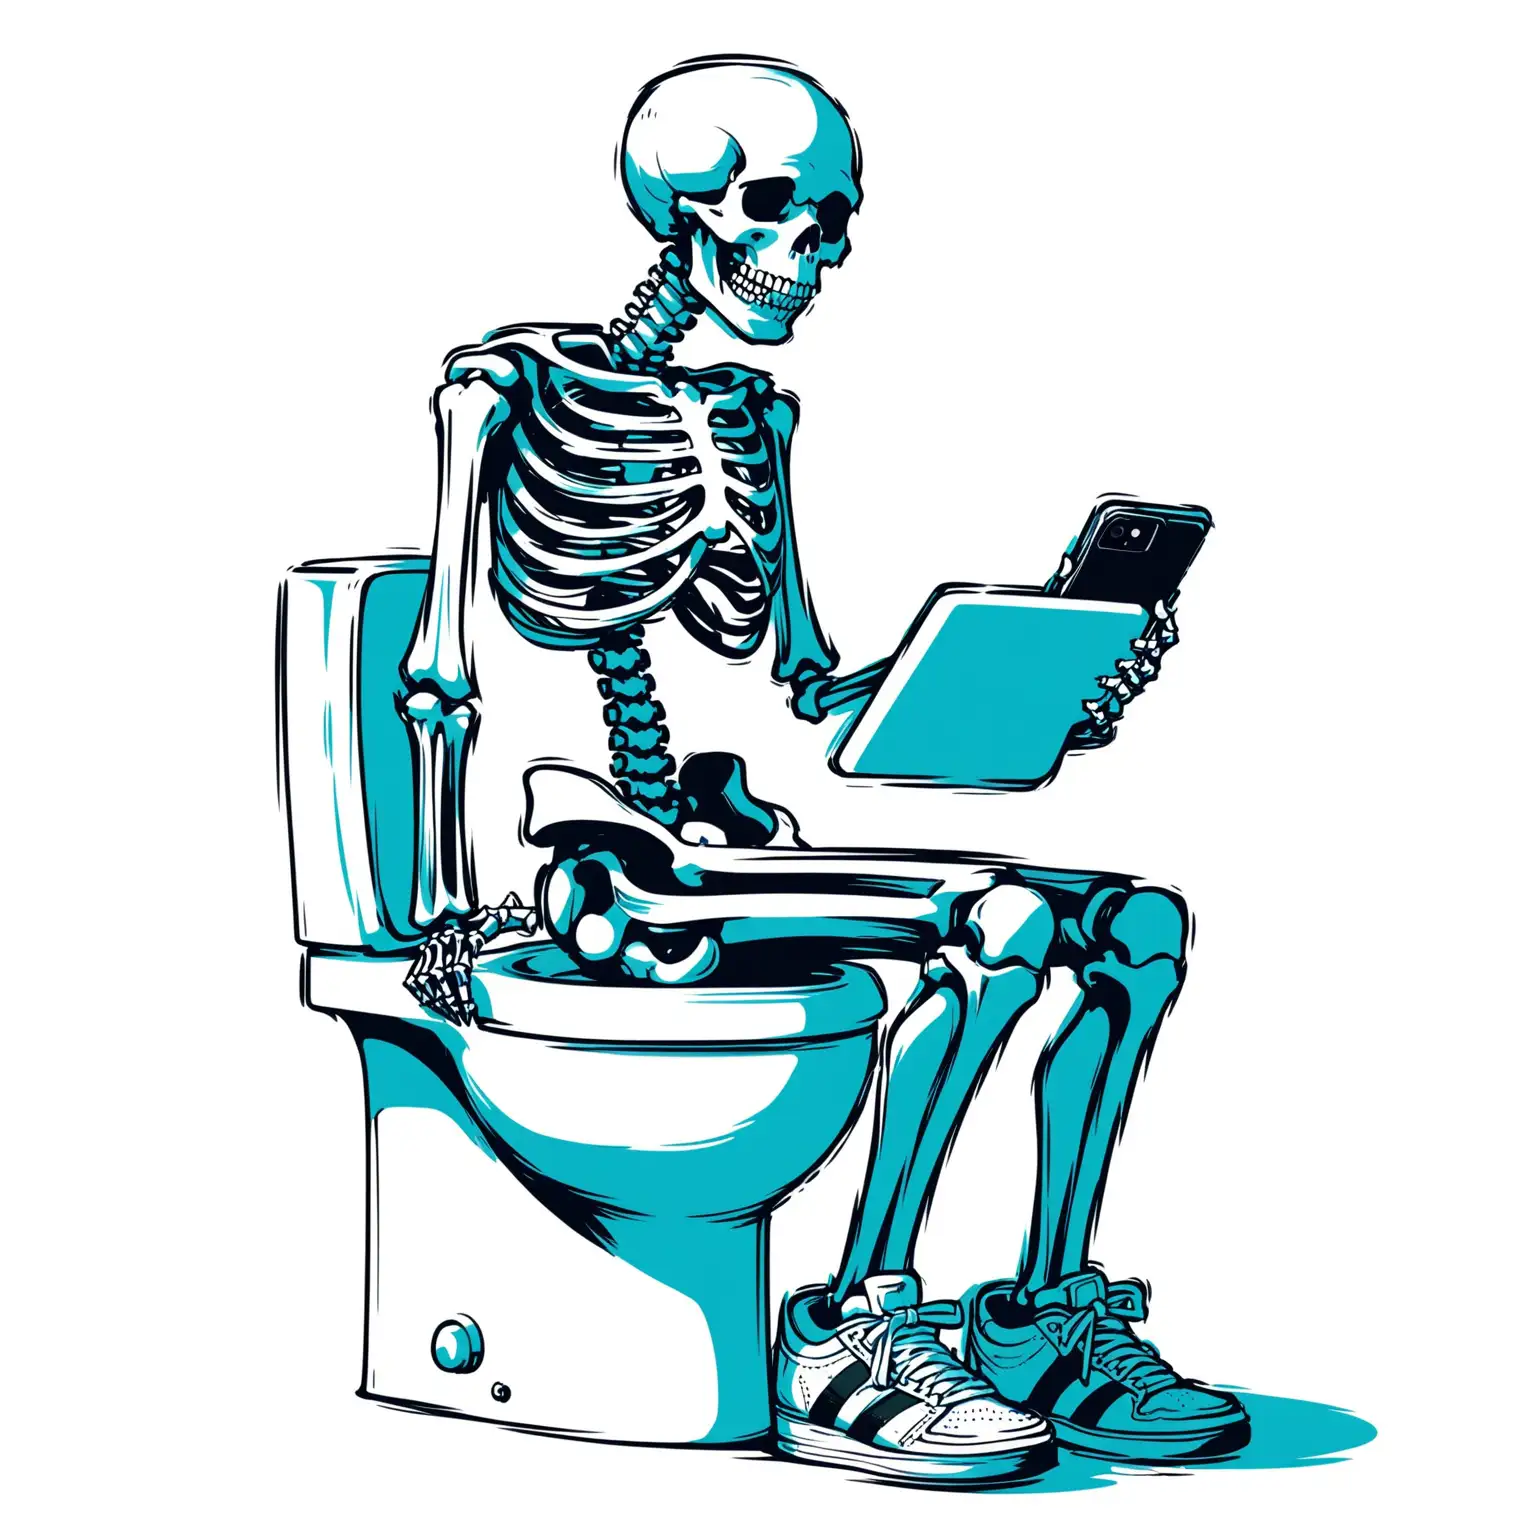 Skeleton Typing on Phone on Toilet with Fallen Pants and Sneaker